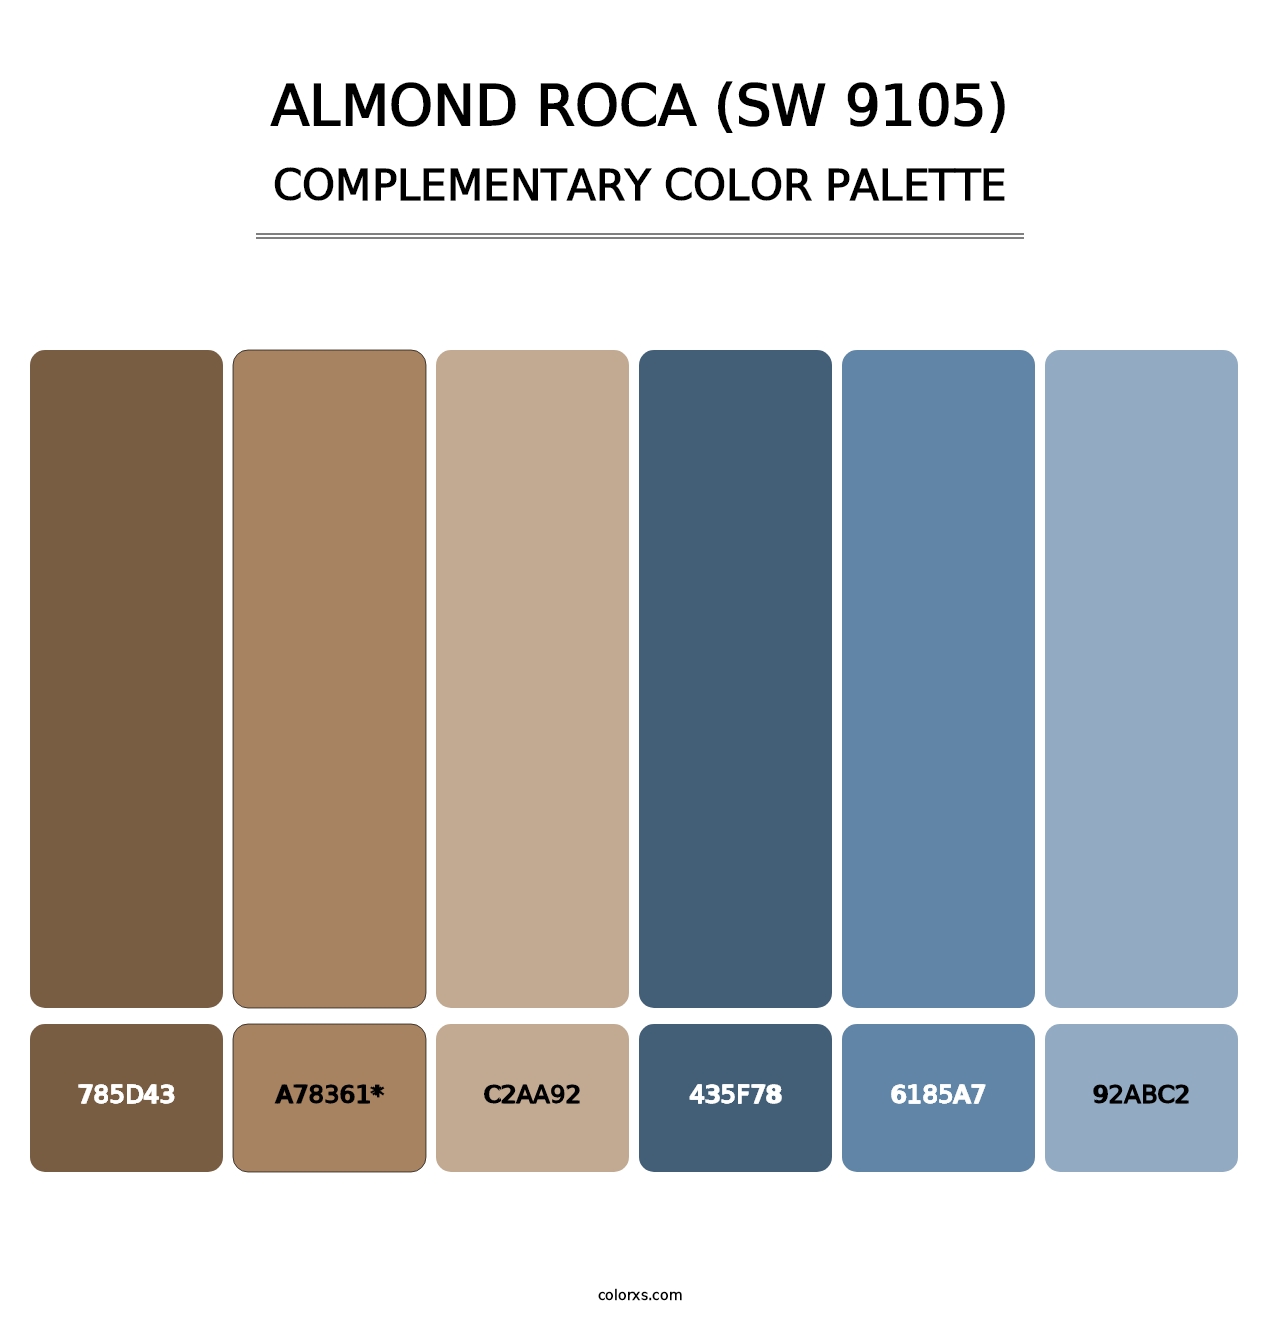 Almond Roca (SW 9105) - Complementary Color Palette